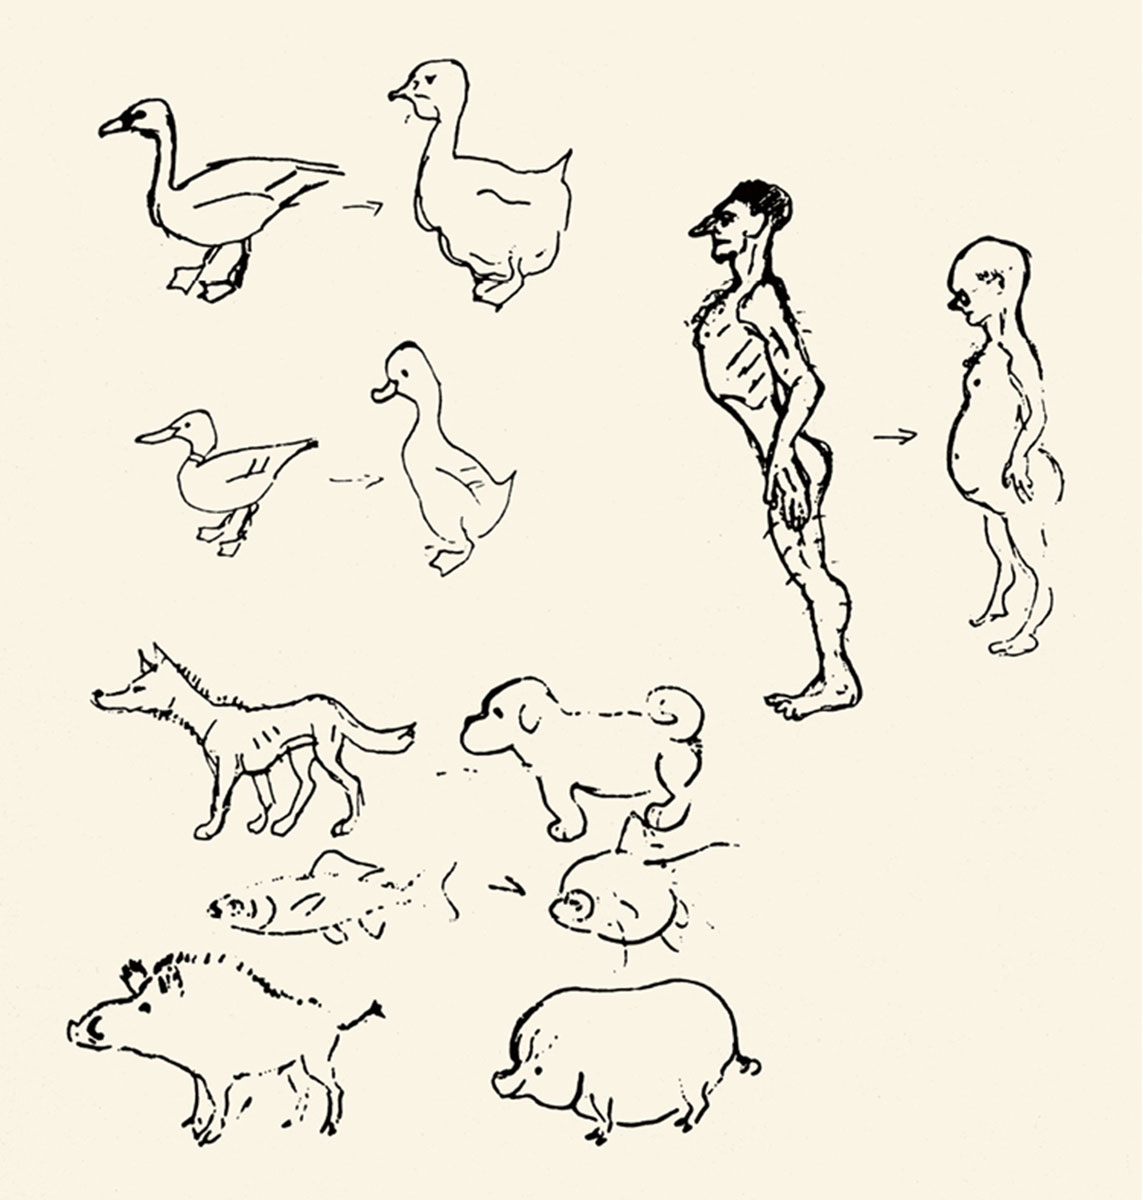 A nineteen thirty-nine sketch by Konrad Lorenz comparing the morphology of wild and domesticated animals—humans included.